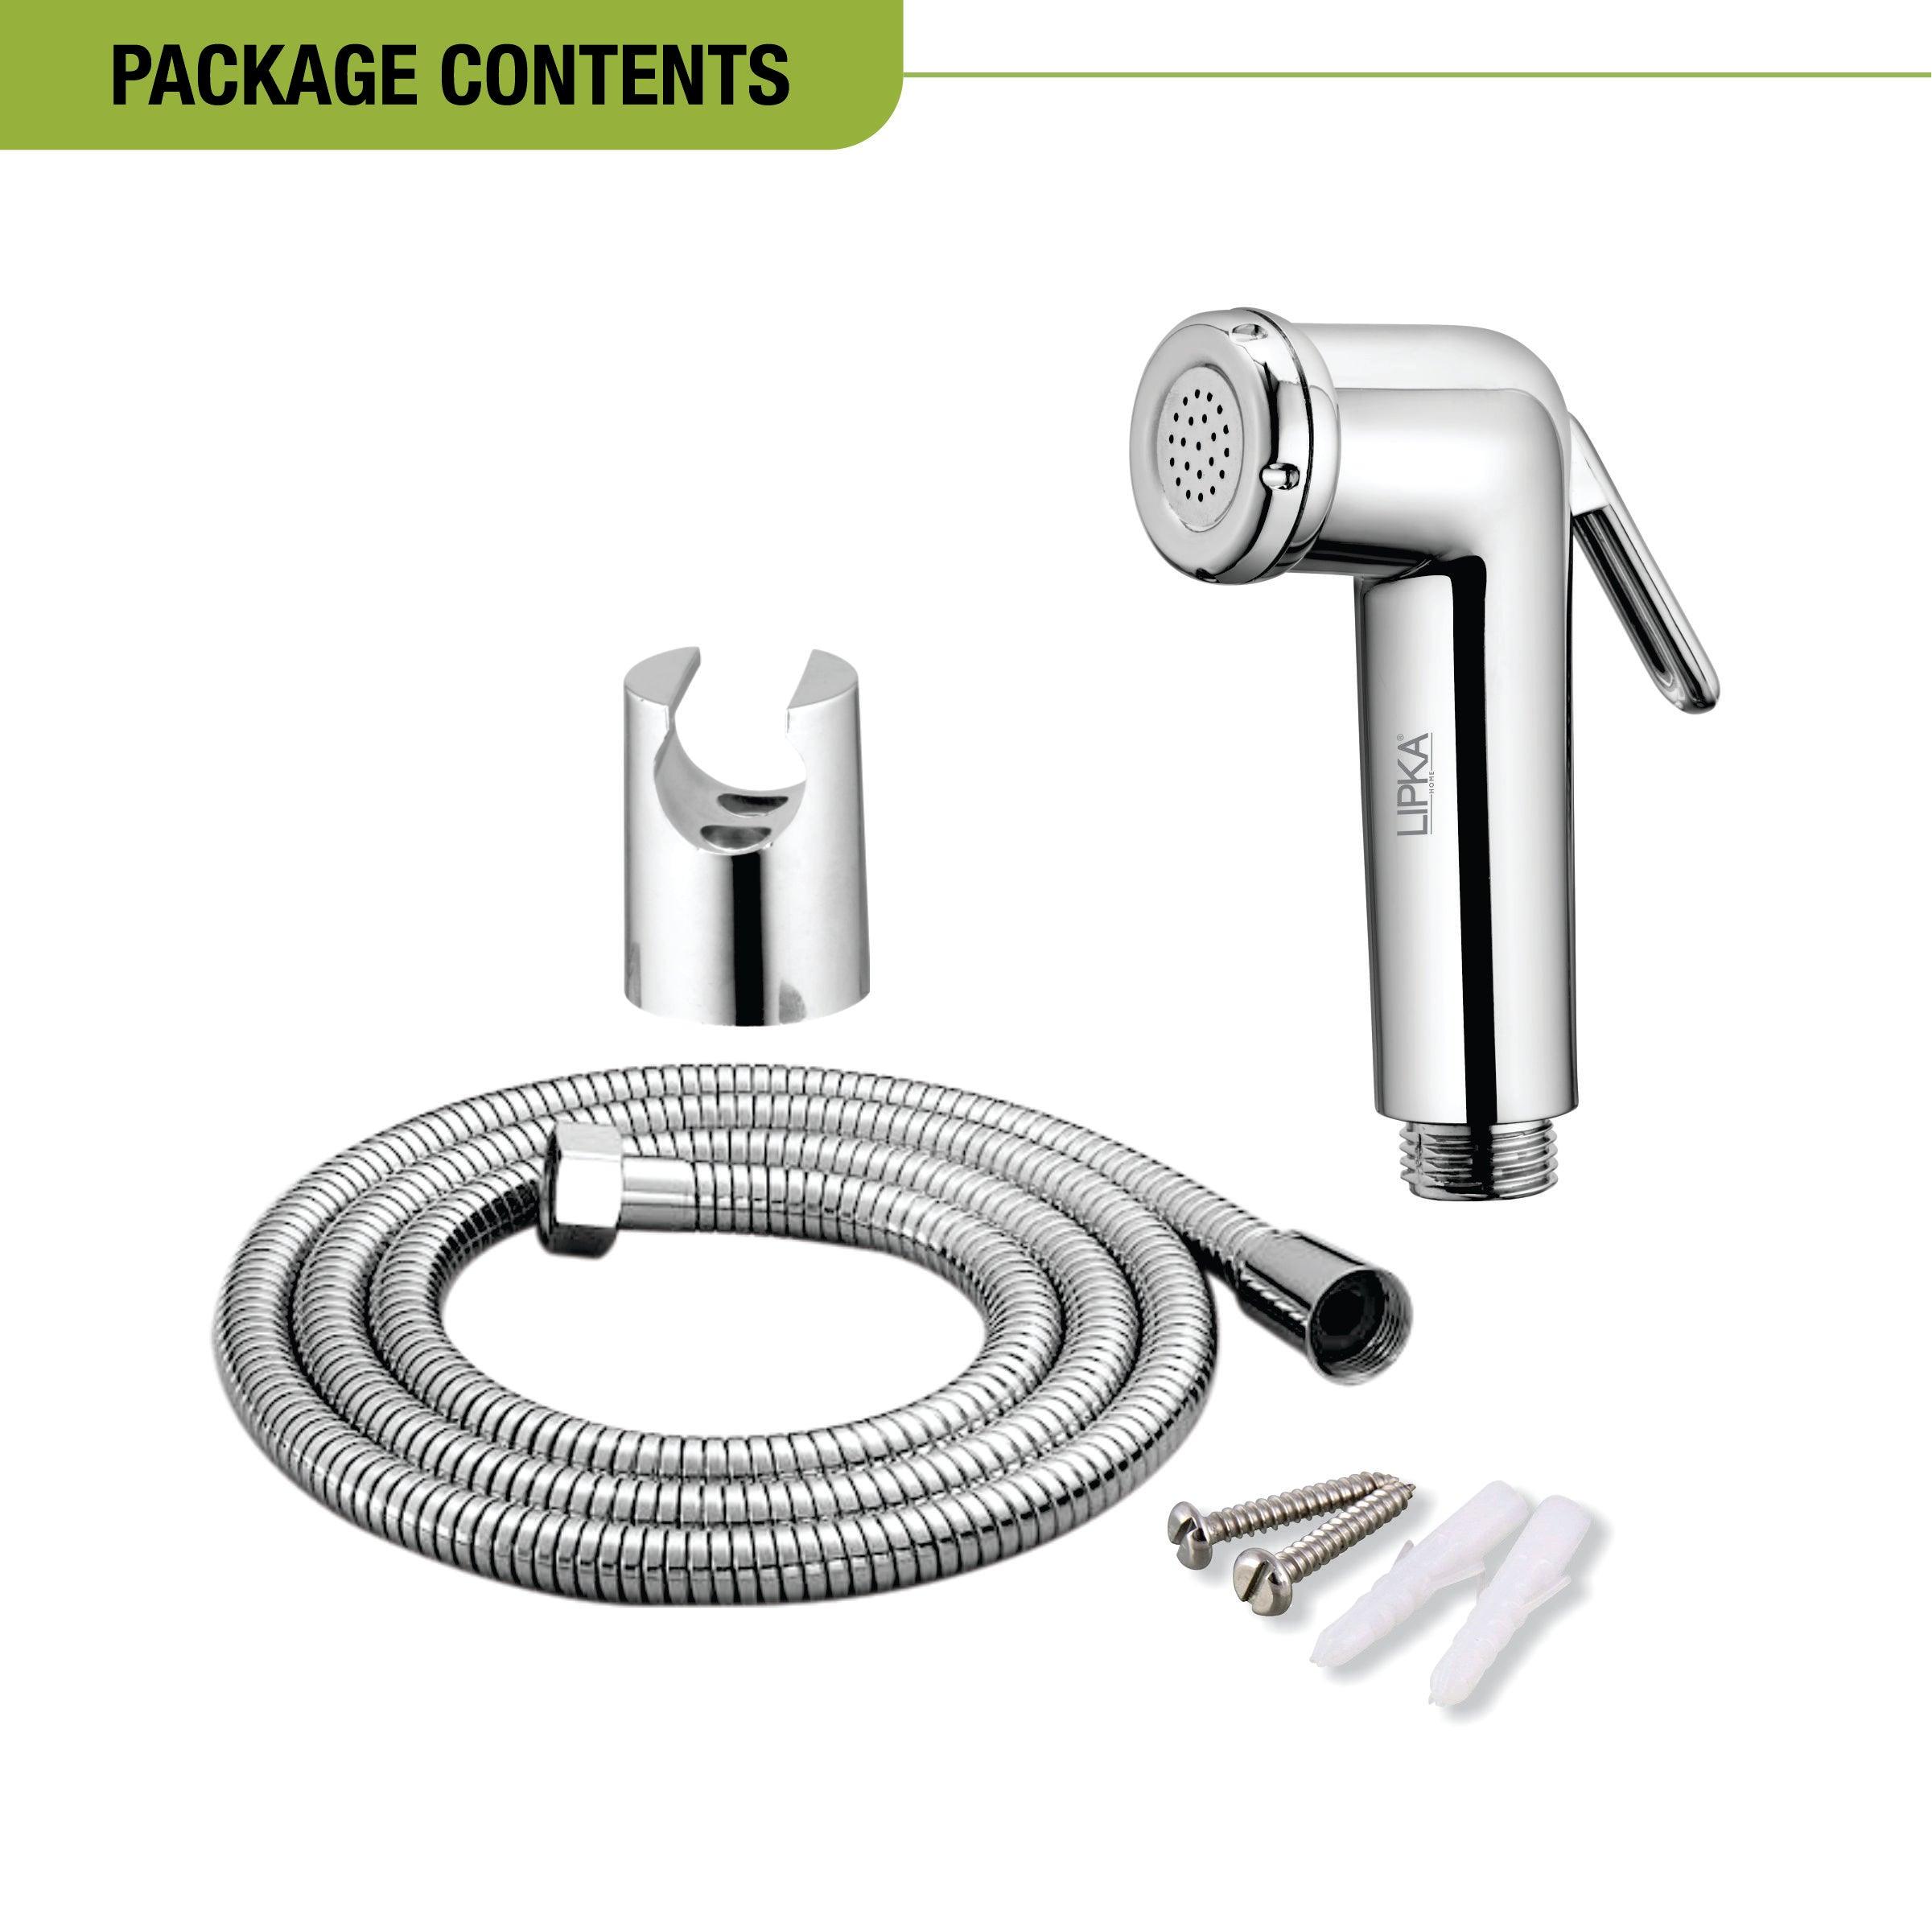 Milano Health Faucet (Complete Set) package contents